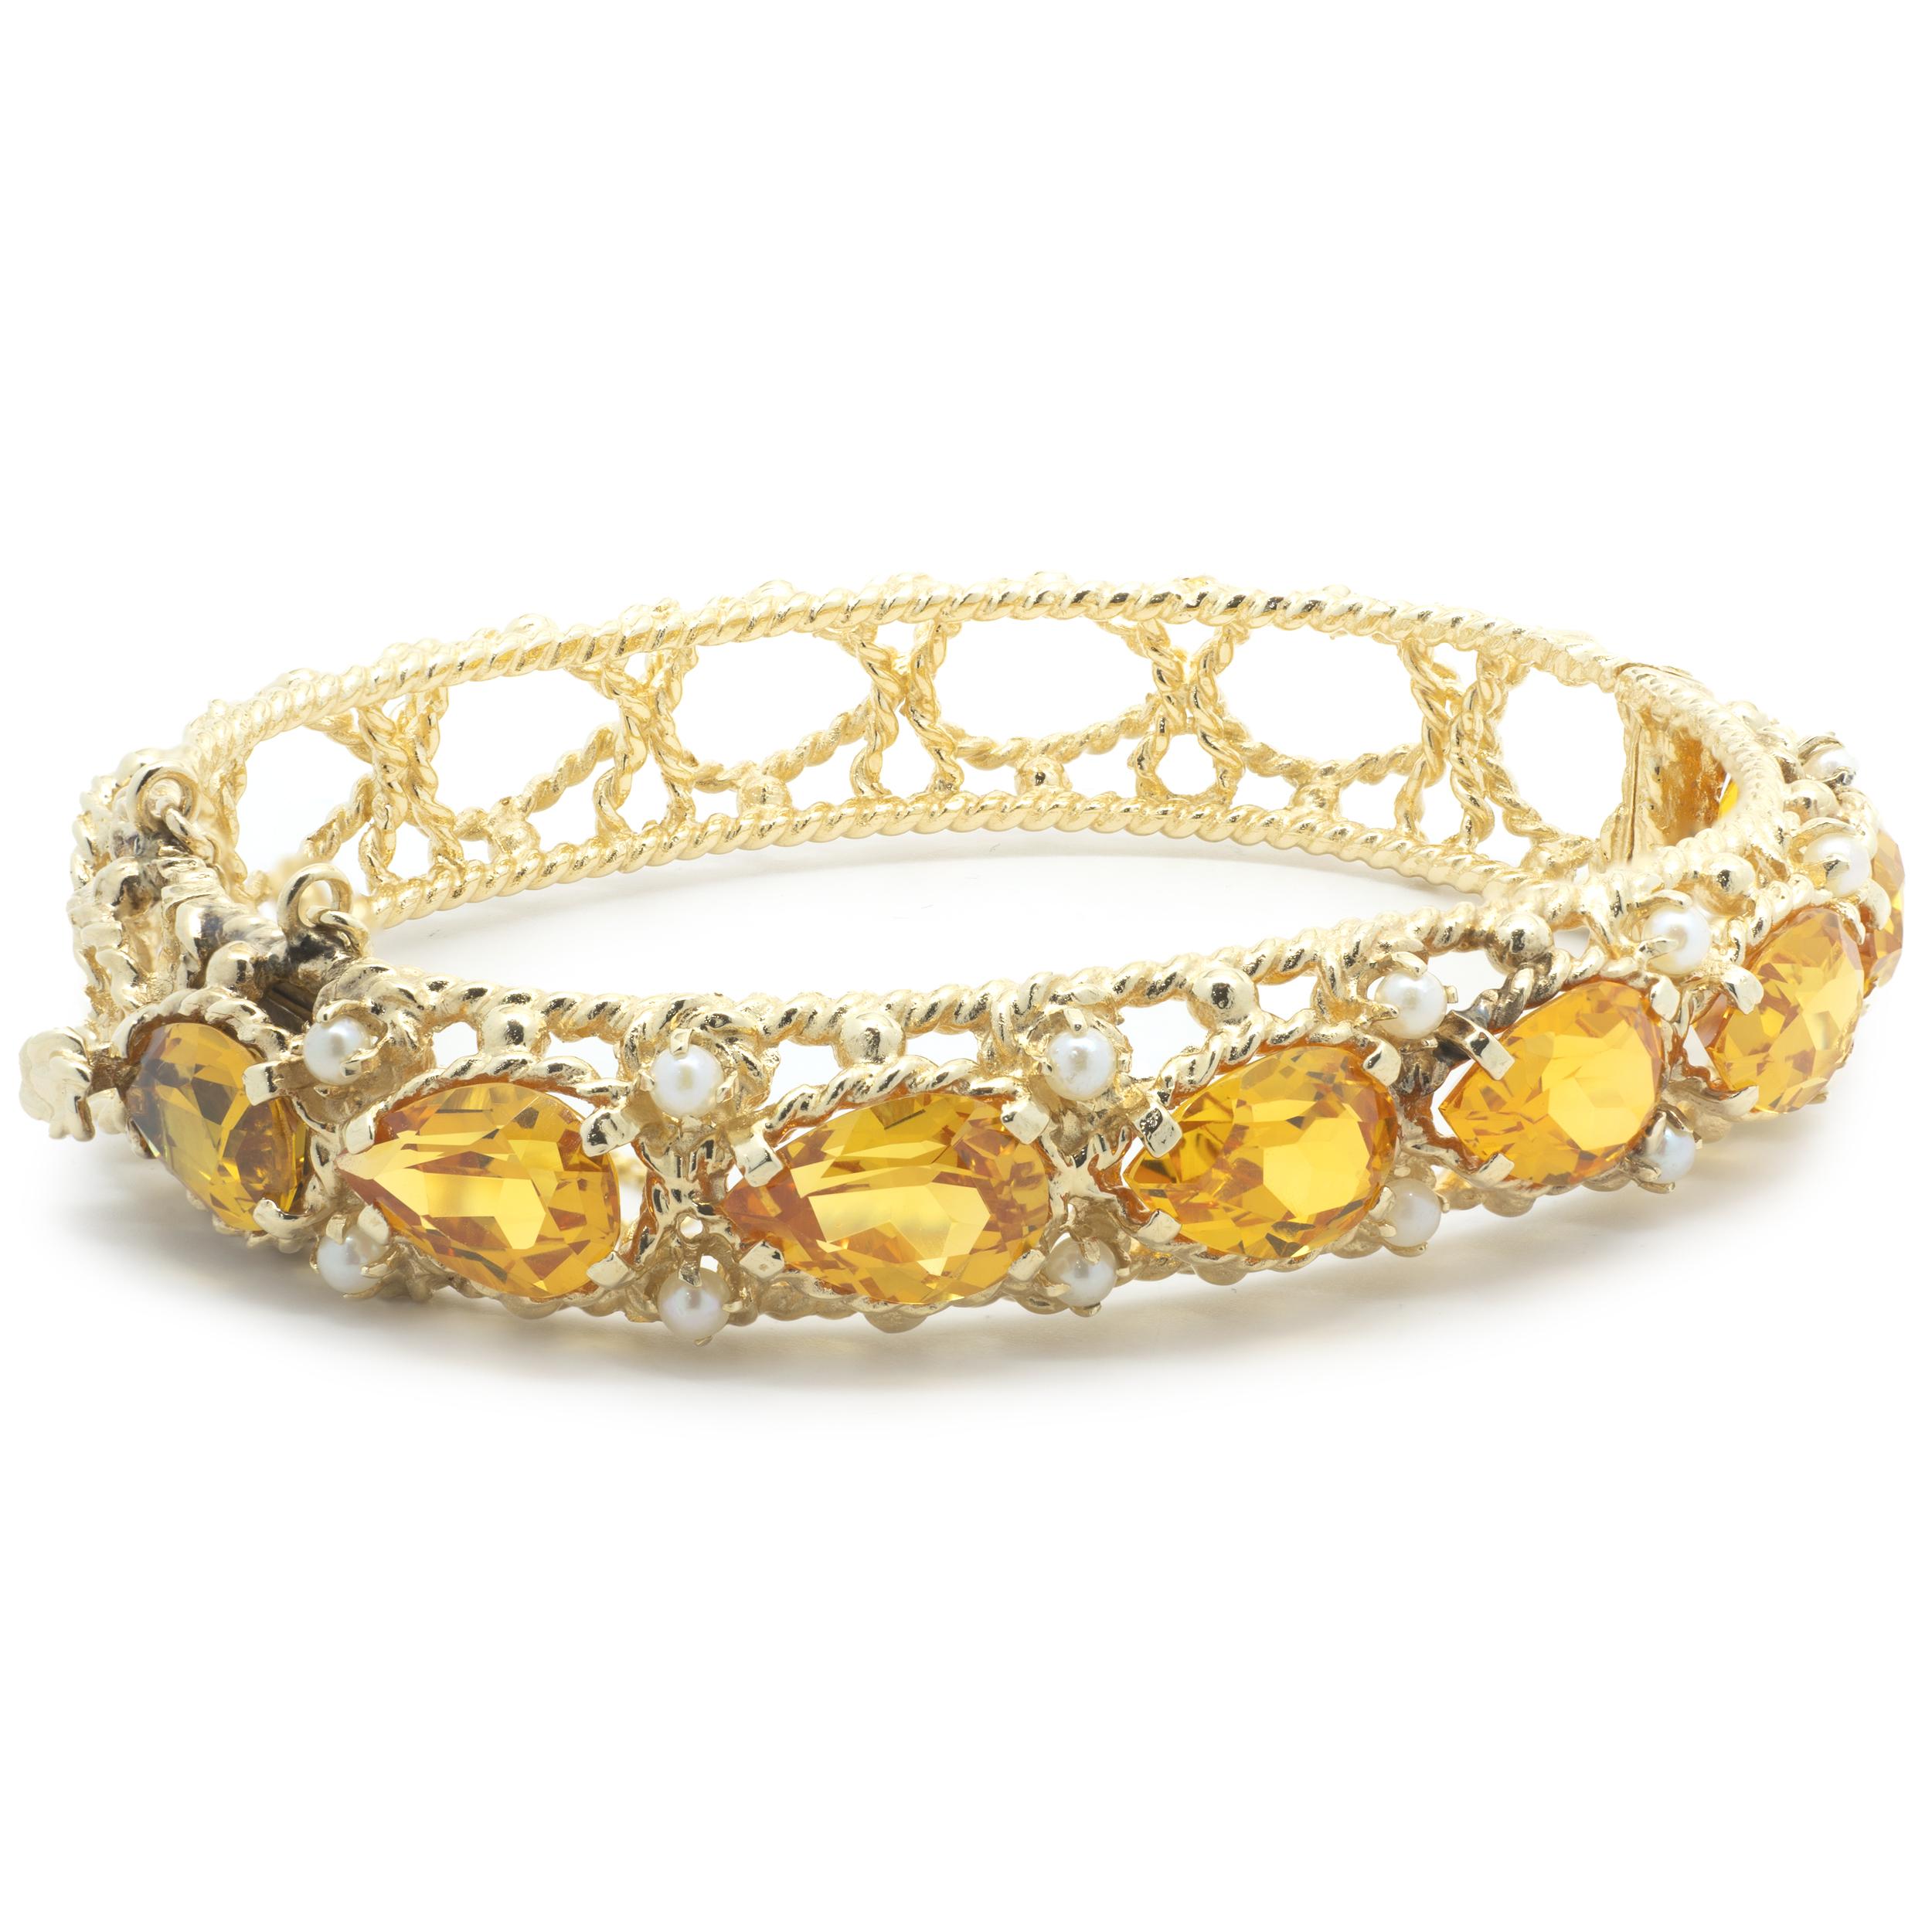 Designer: custom 
Material: 14K yellow gold
Dimensions: bracelet will fit up to a 7-inch wrist
Weight: 30.48 grams
